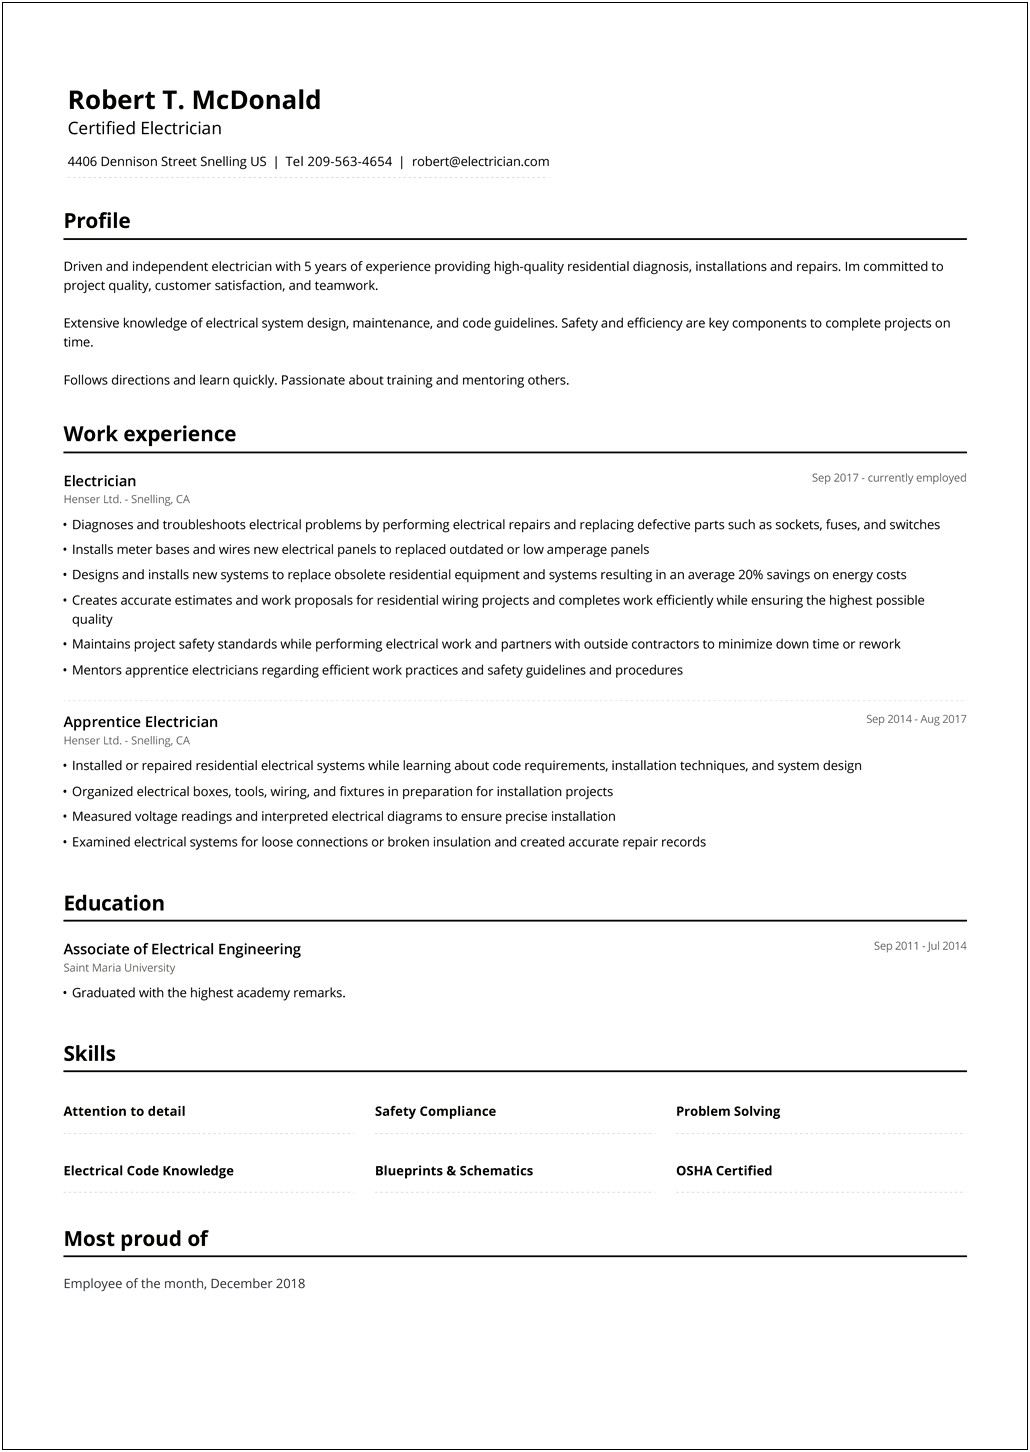 Traditional Chronological Resume Template For 50 And Older